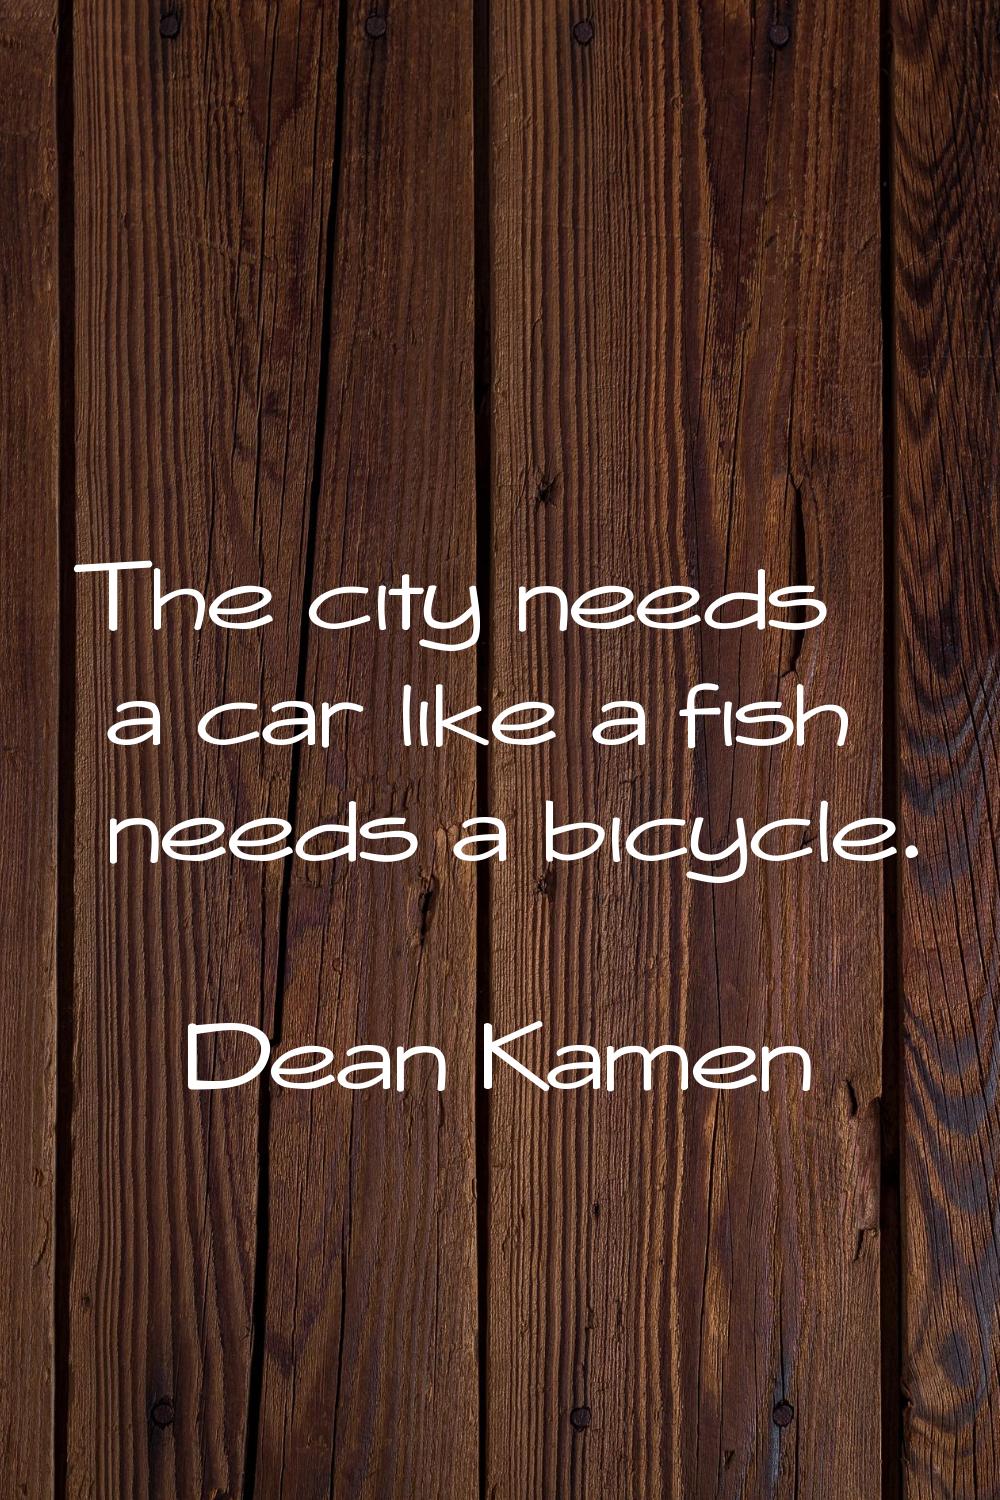 The city needs a car like a fish needs a bicycle.